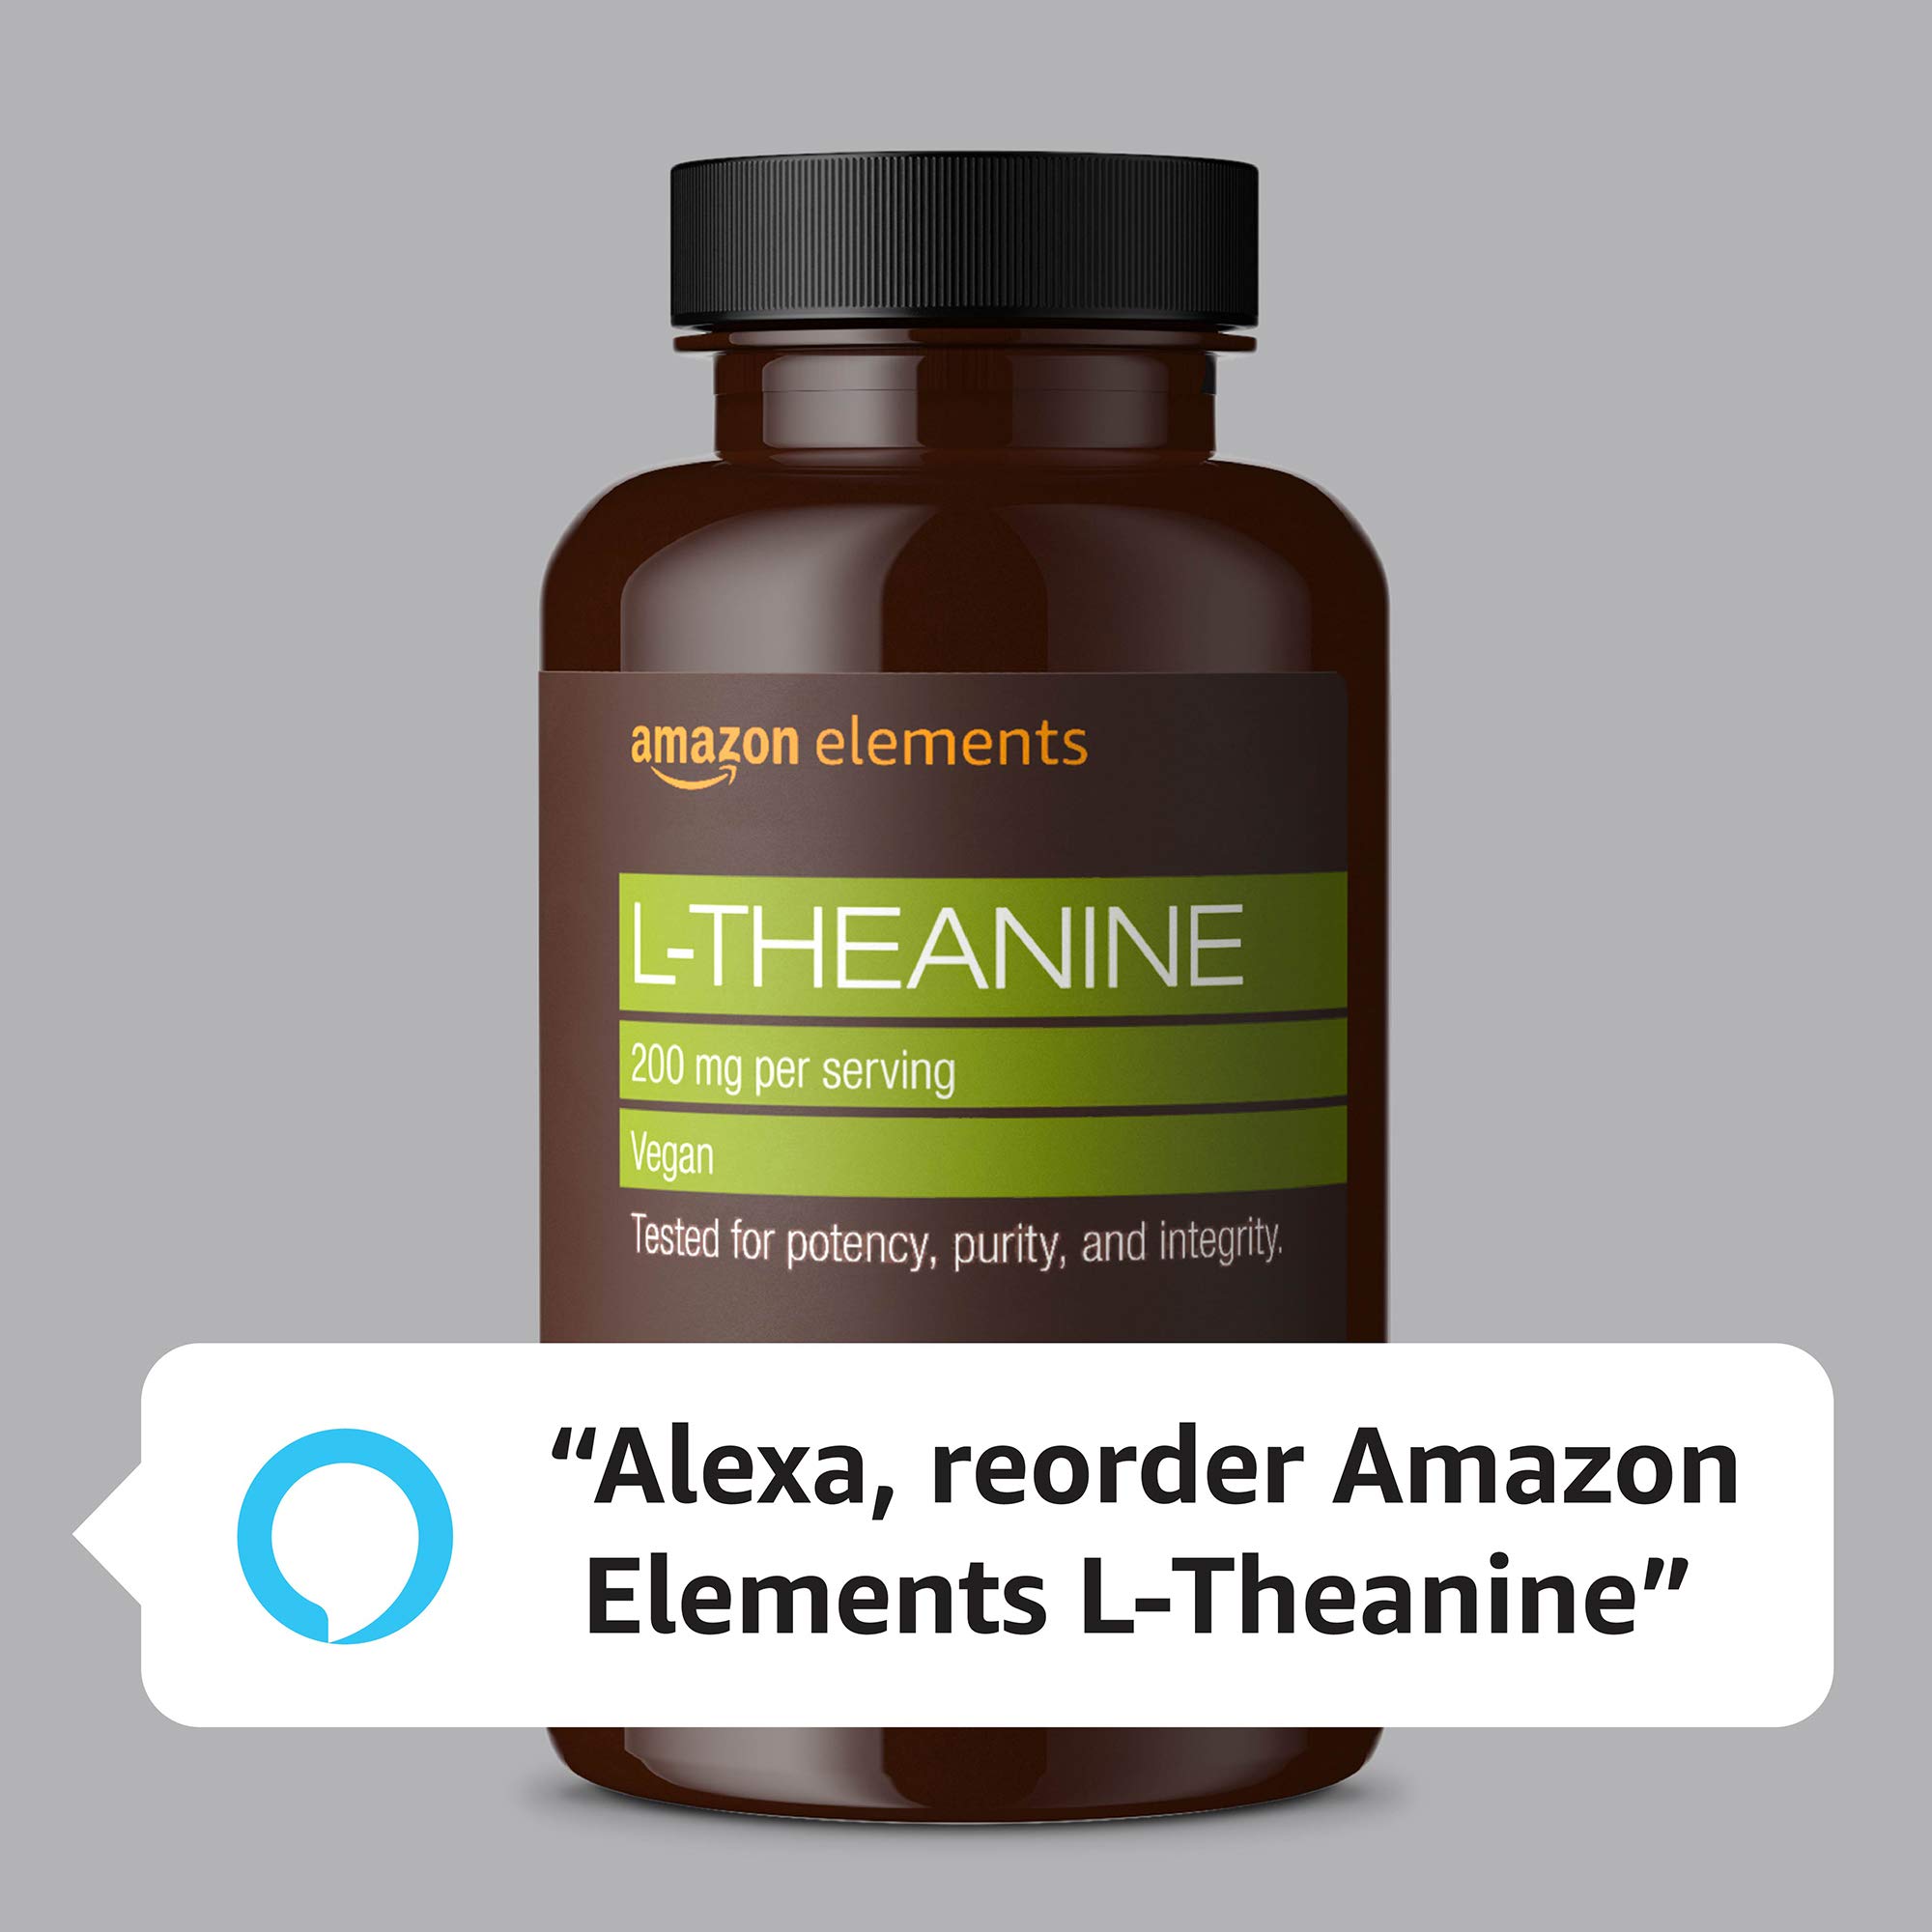 Amazon Elements L-Theanine, 200mg, 60 Capsules, 2 month supply (Packaging may vary)